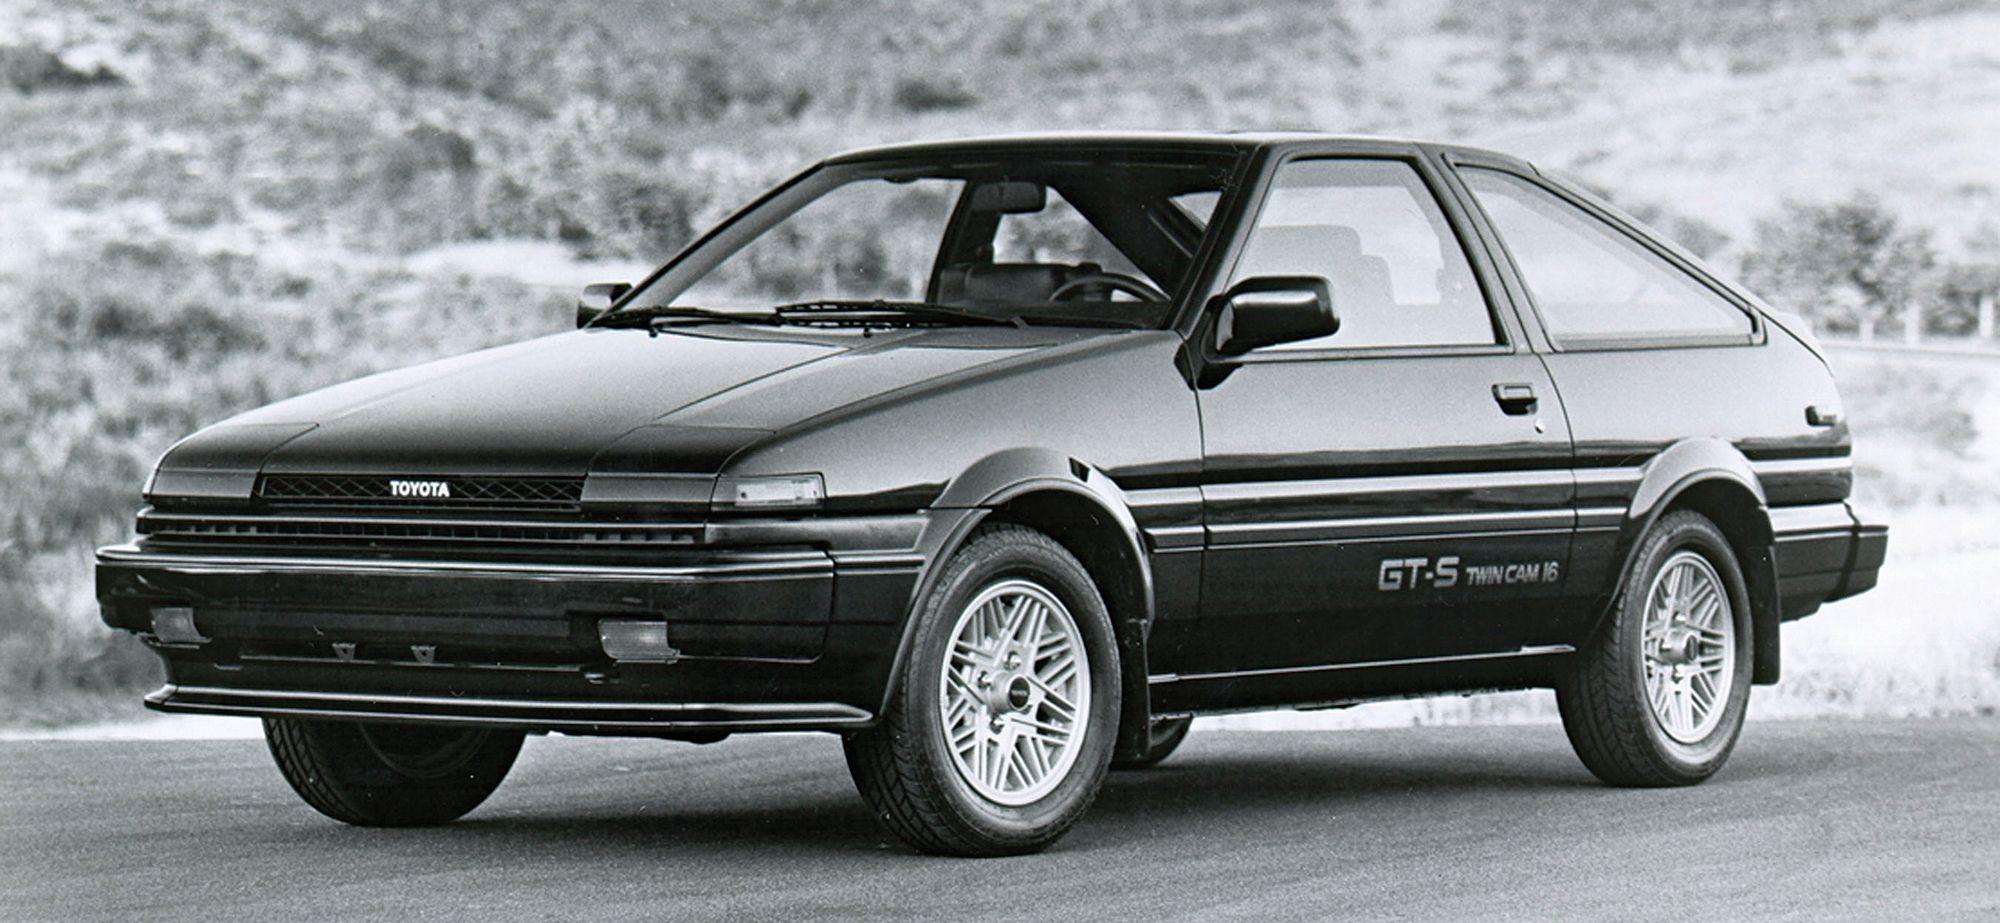 AE86 Toyota Logo - Vintage Views: Toyota AE86 Corolla GT S. Articles. Grassroots